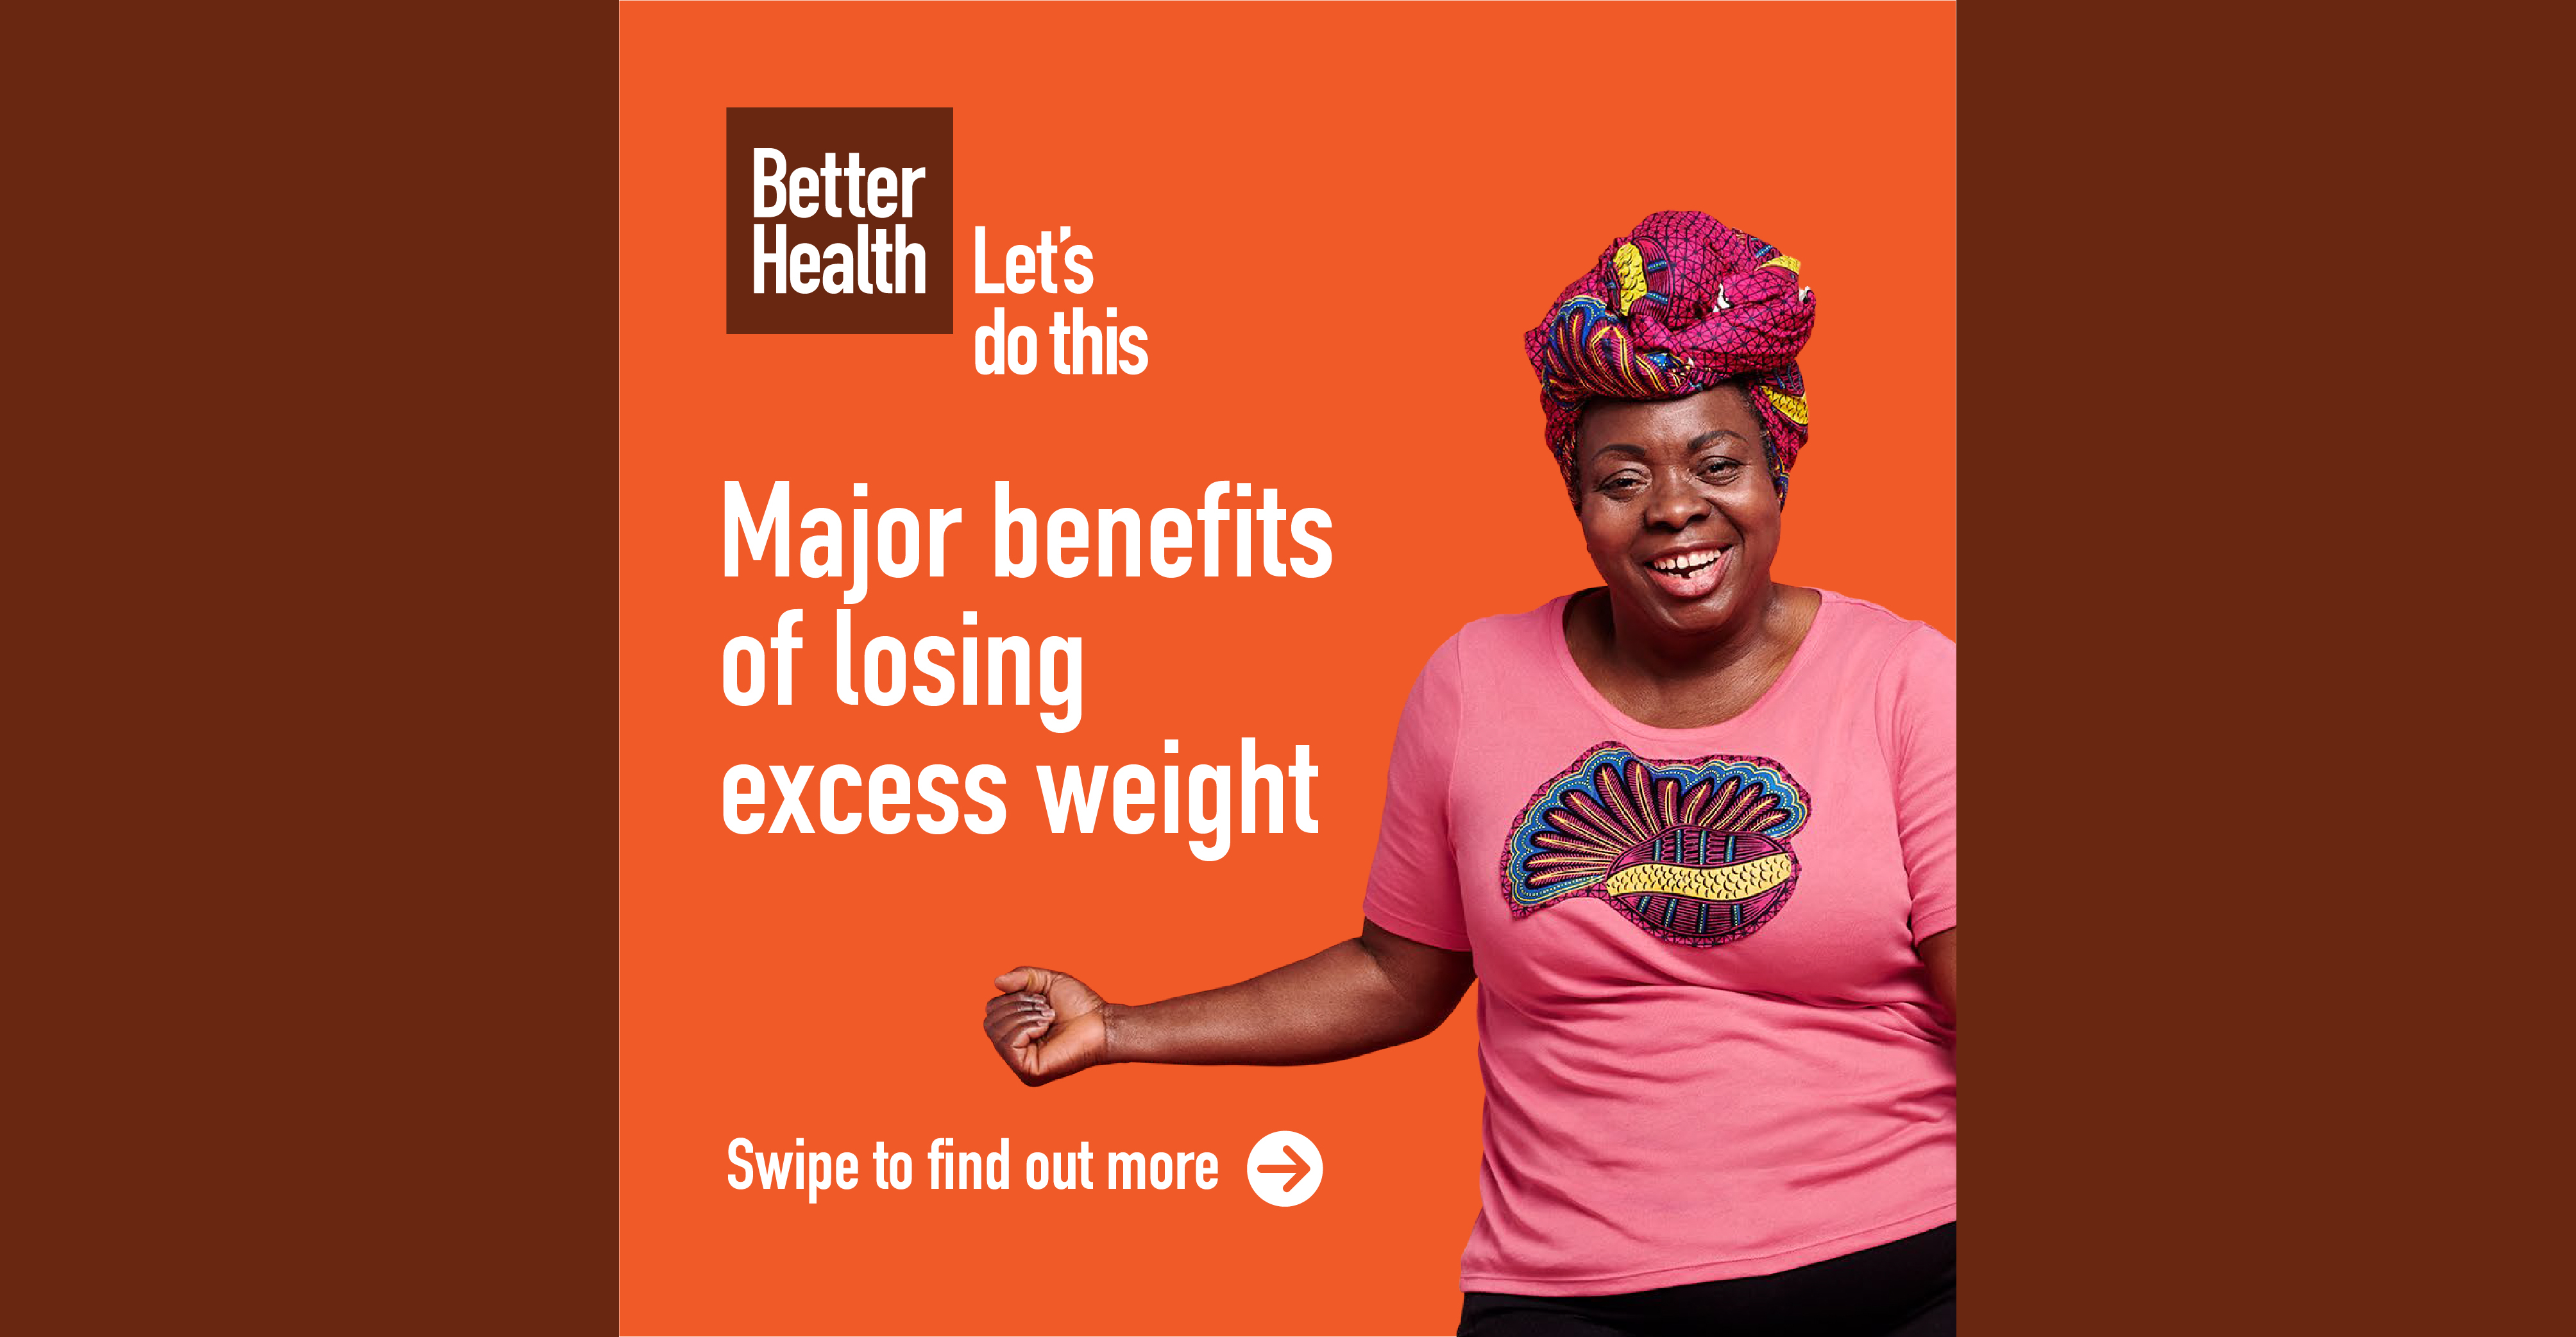 NEW CAMPAIGN TARGETING BLACK ADULTS REVEALS SIX MAJOR HEALTH BENEFITS OF LOSING WEIGHT